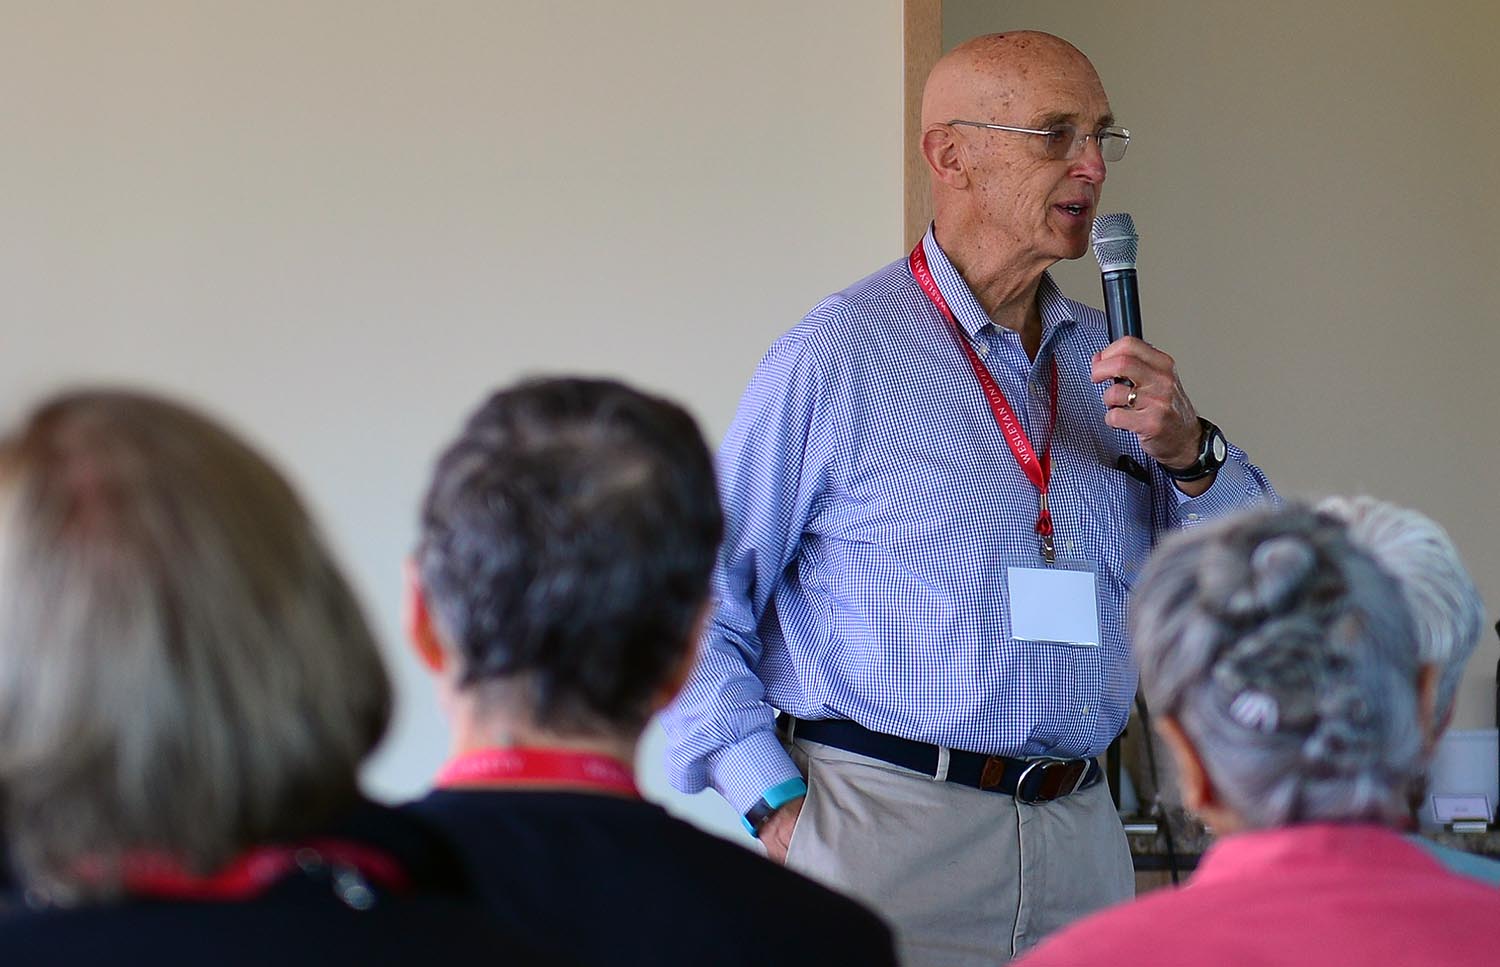 Professor of Psychology Emeritus Karl Scheibe convened the Saturday seminars with an exercise in sharing experiences that he had used in his Dramaturgical Approach to Psychology course.